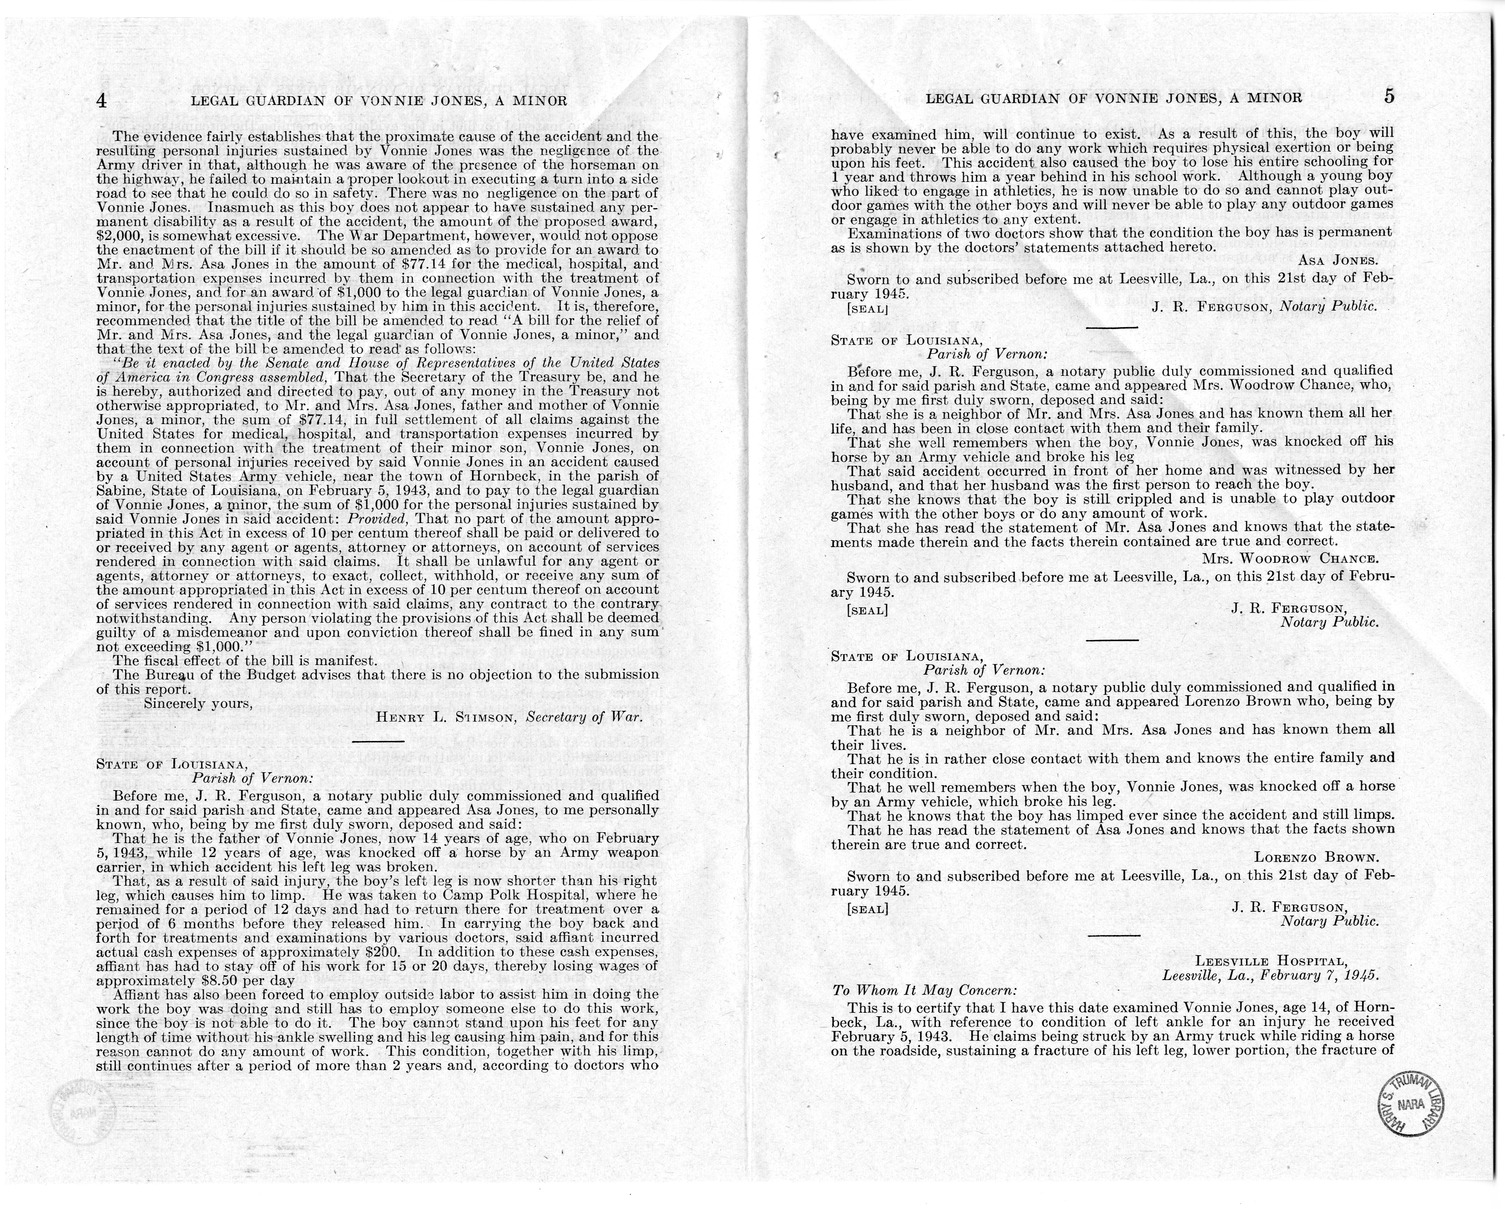 Memorandum from Frederick J. Bailey to M. C. Latta, H. R. 780, for the Relief of the Legal Guardian of Vonnie Jones, with Attachments